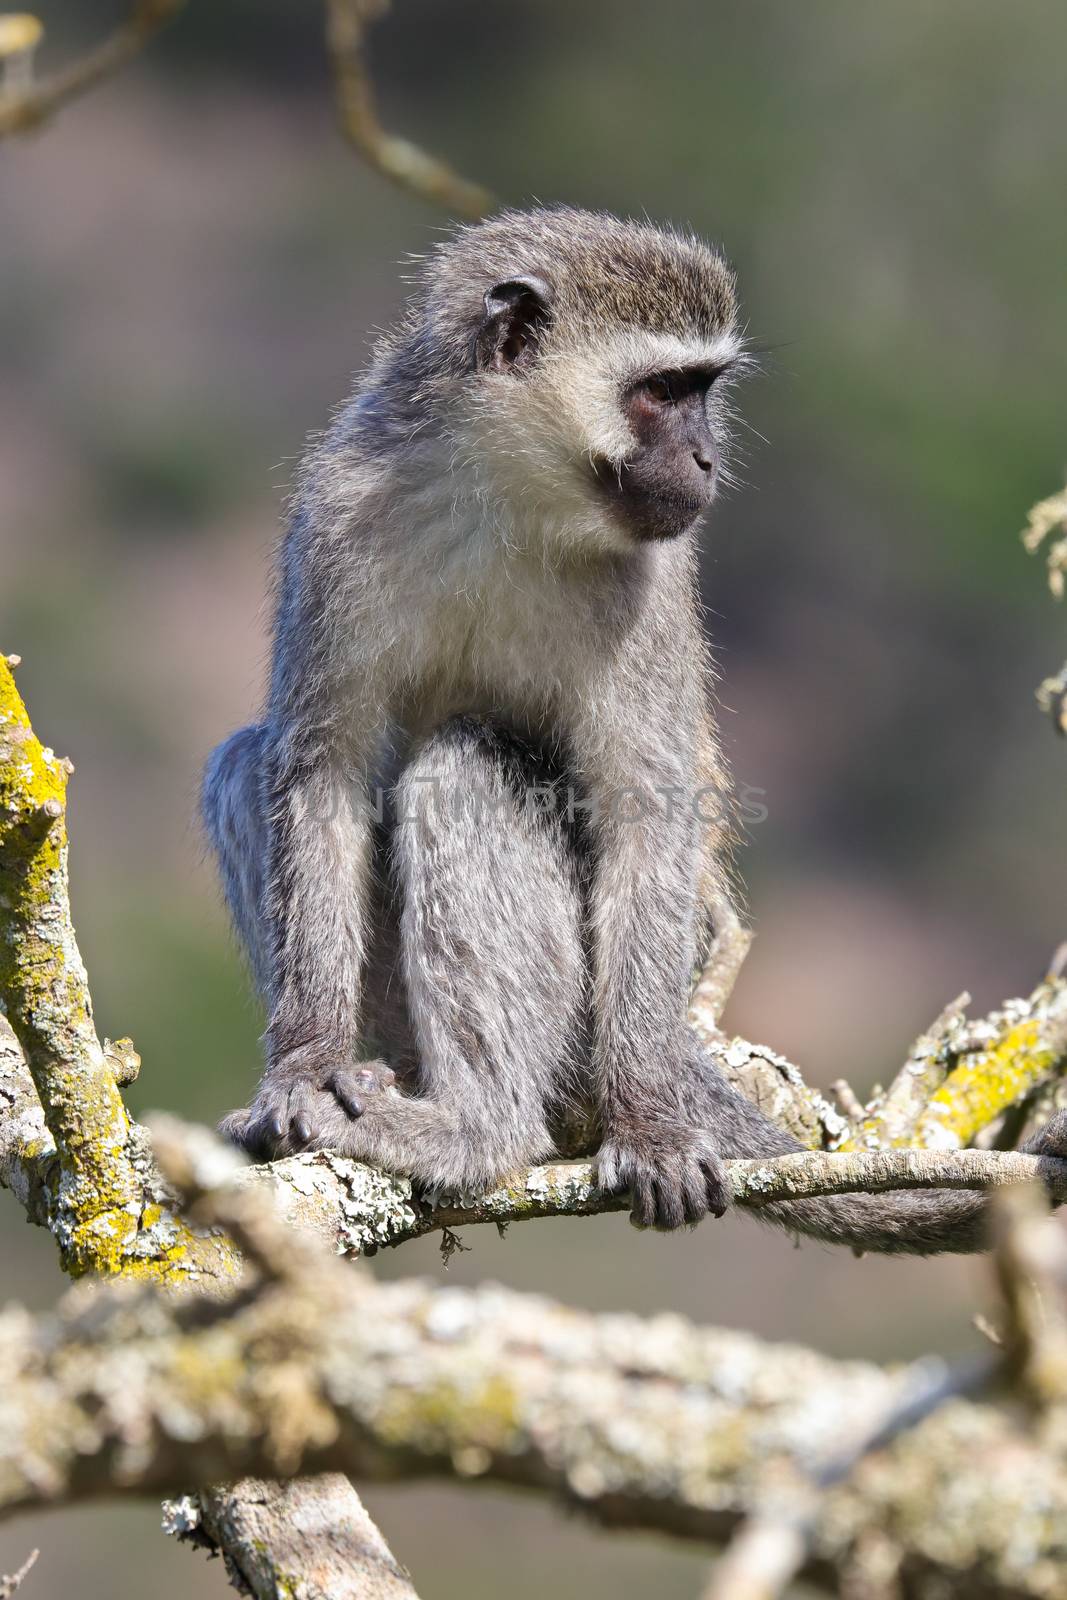 Vervet monkey primate (Chlorocebus pygerythrus) sitting on a tree branch looking to side, Mossel Bay, South Africa